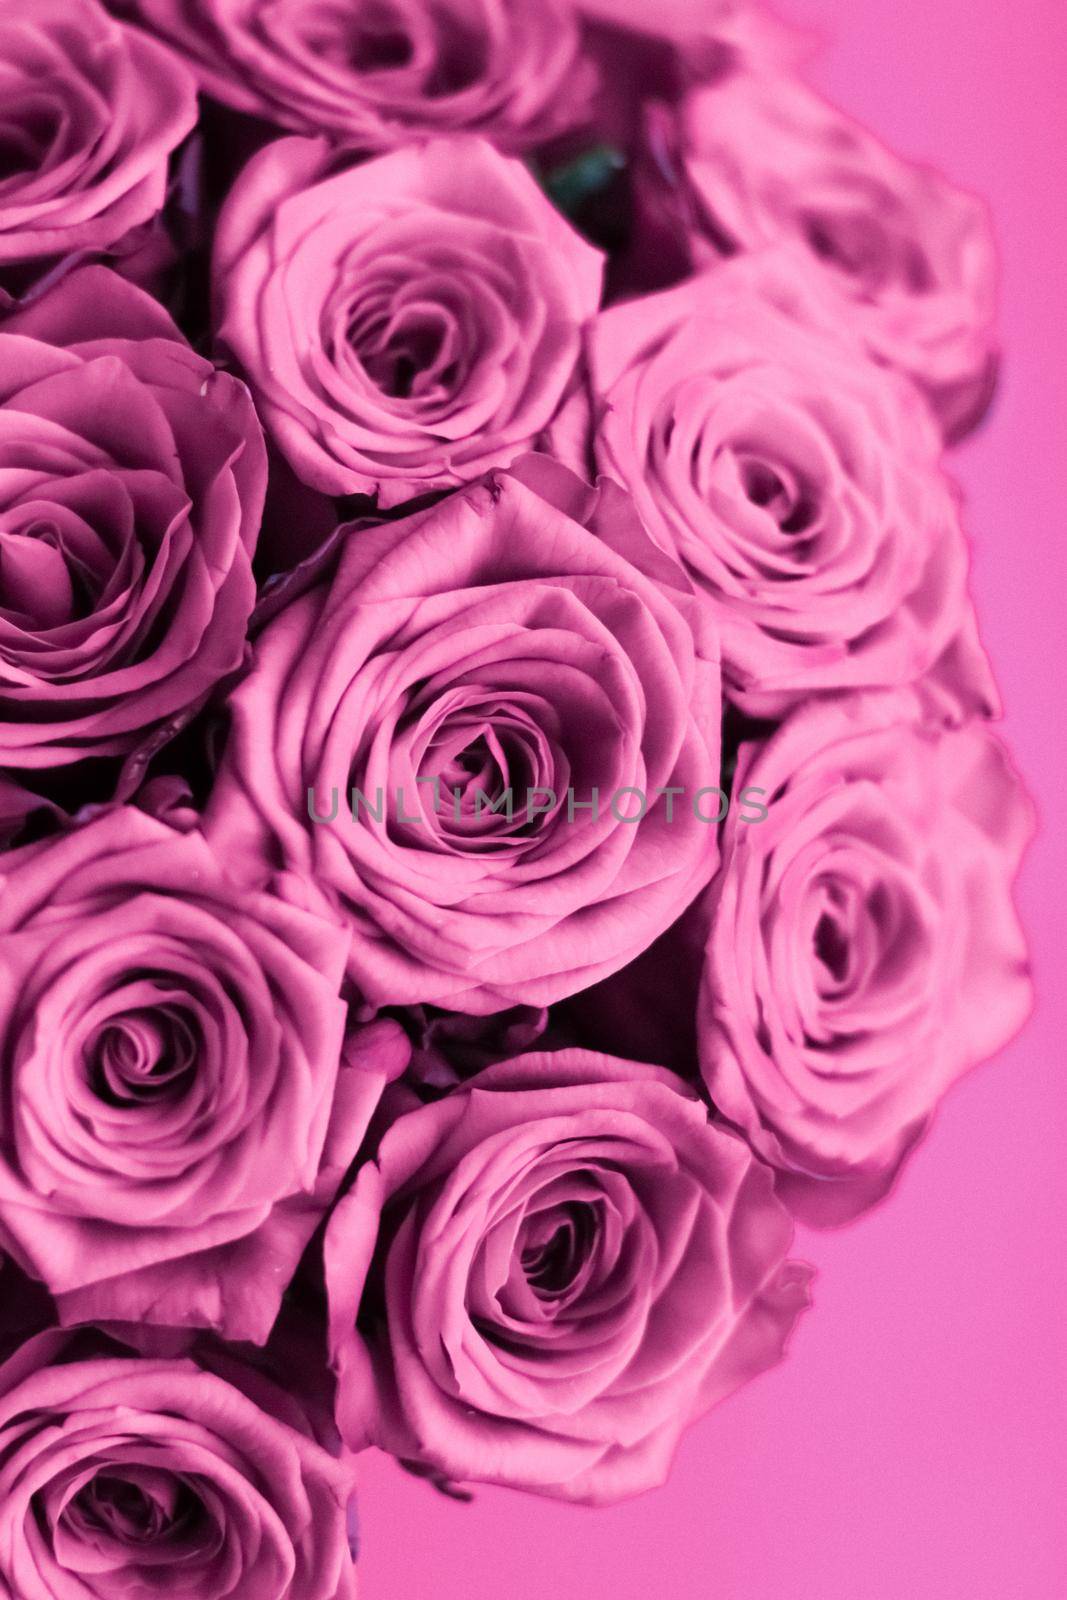 Blooming rose, flower blossom and Valentines Day gift concept - Luxury bouquet of purple roses, flowers in bloom as floral holiday background